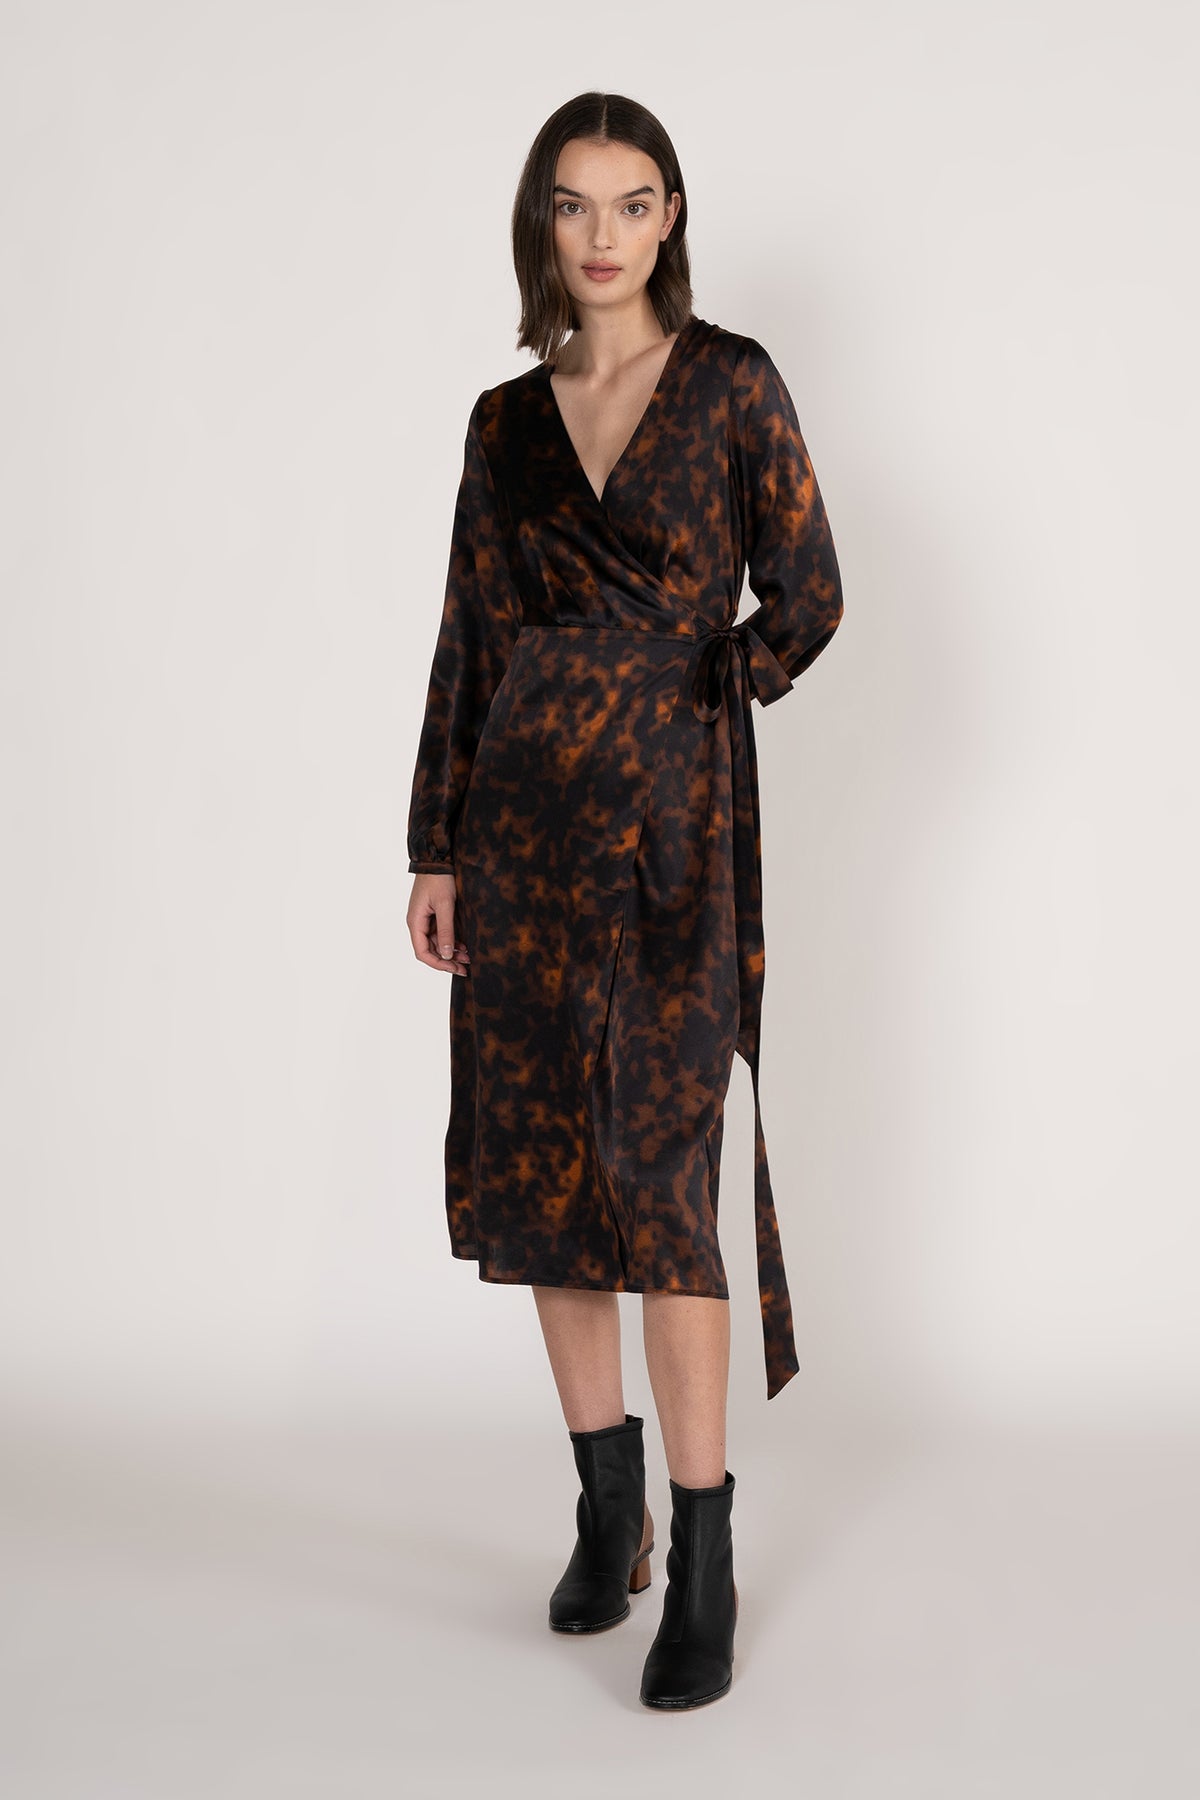 GINIA Madeline Wrap Dress in Ember